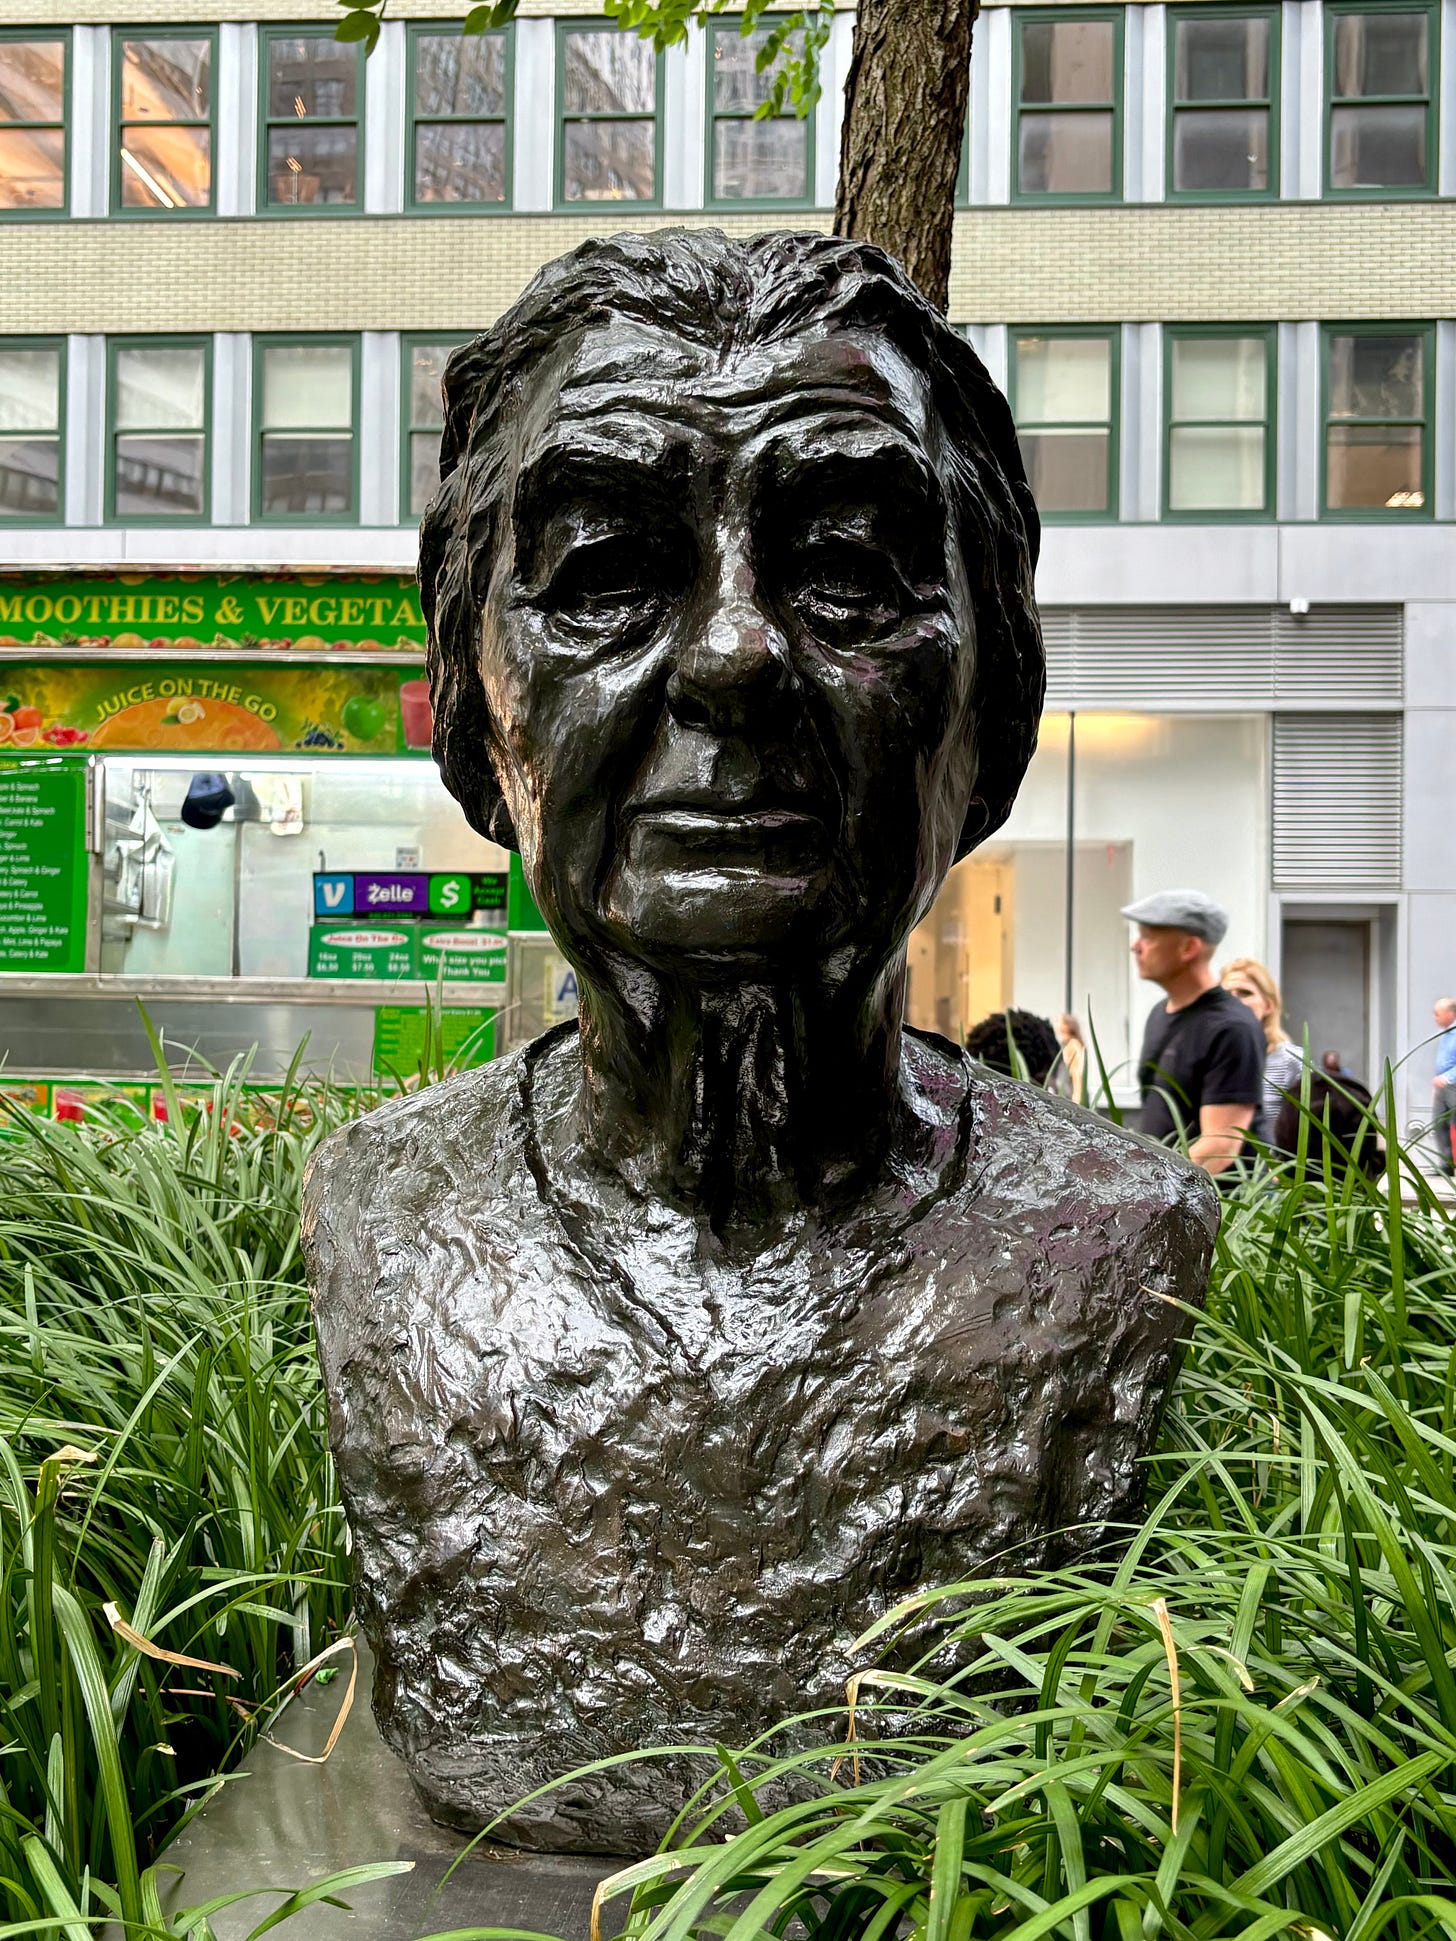 A metal bust of Golda Meir looking sever but thoughtful, resting in a planter of grass.